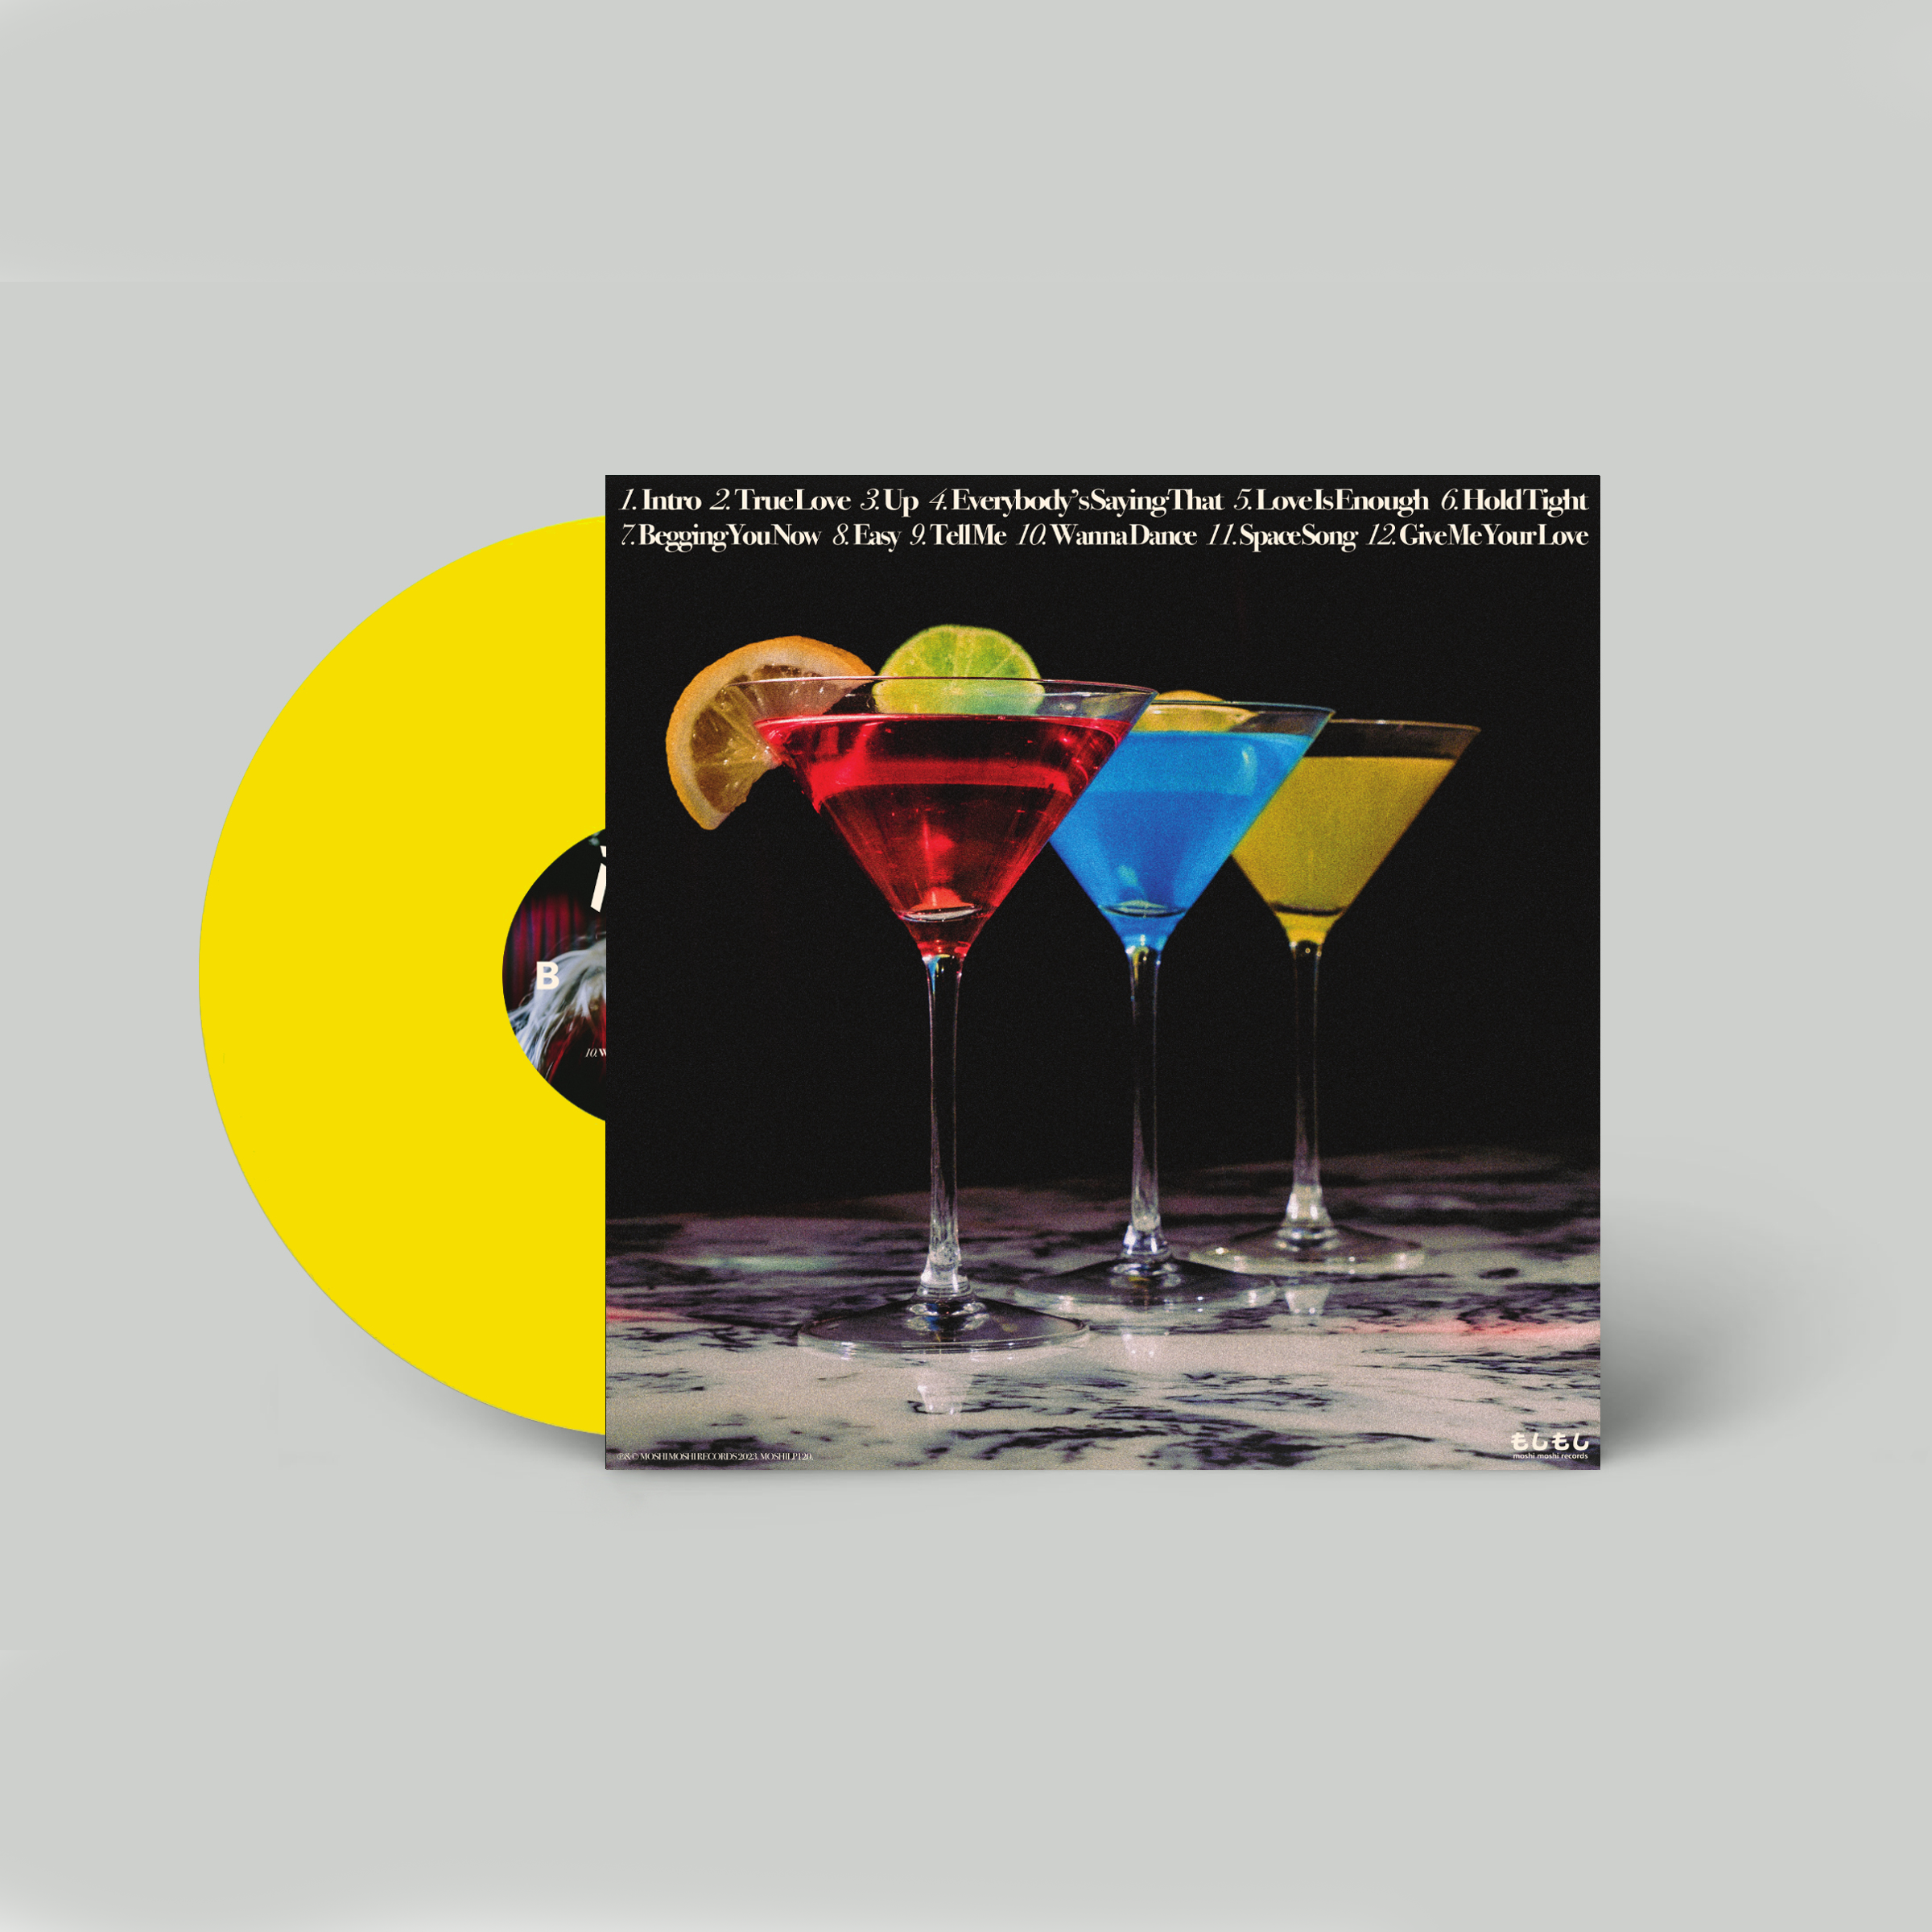 Prestige: Limited Mimosa Yellow Vinyl LP + Exclusive Signed Print